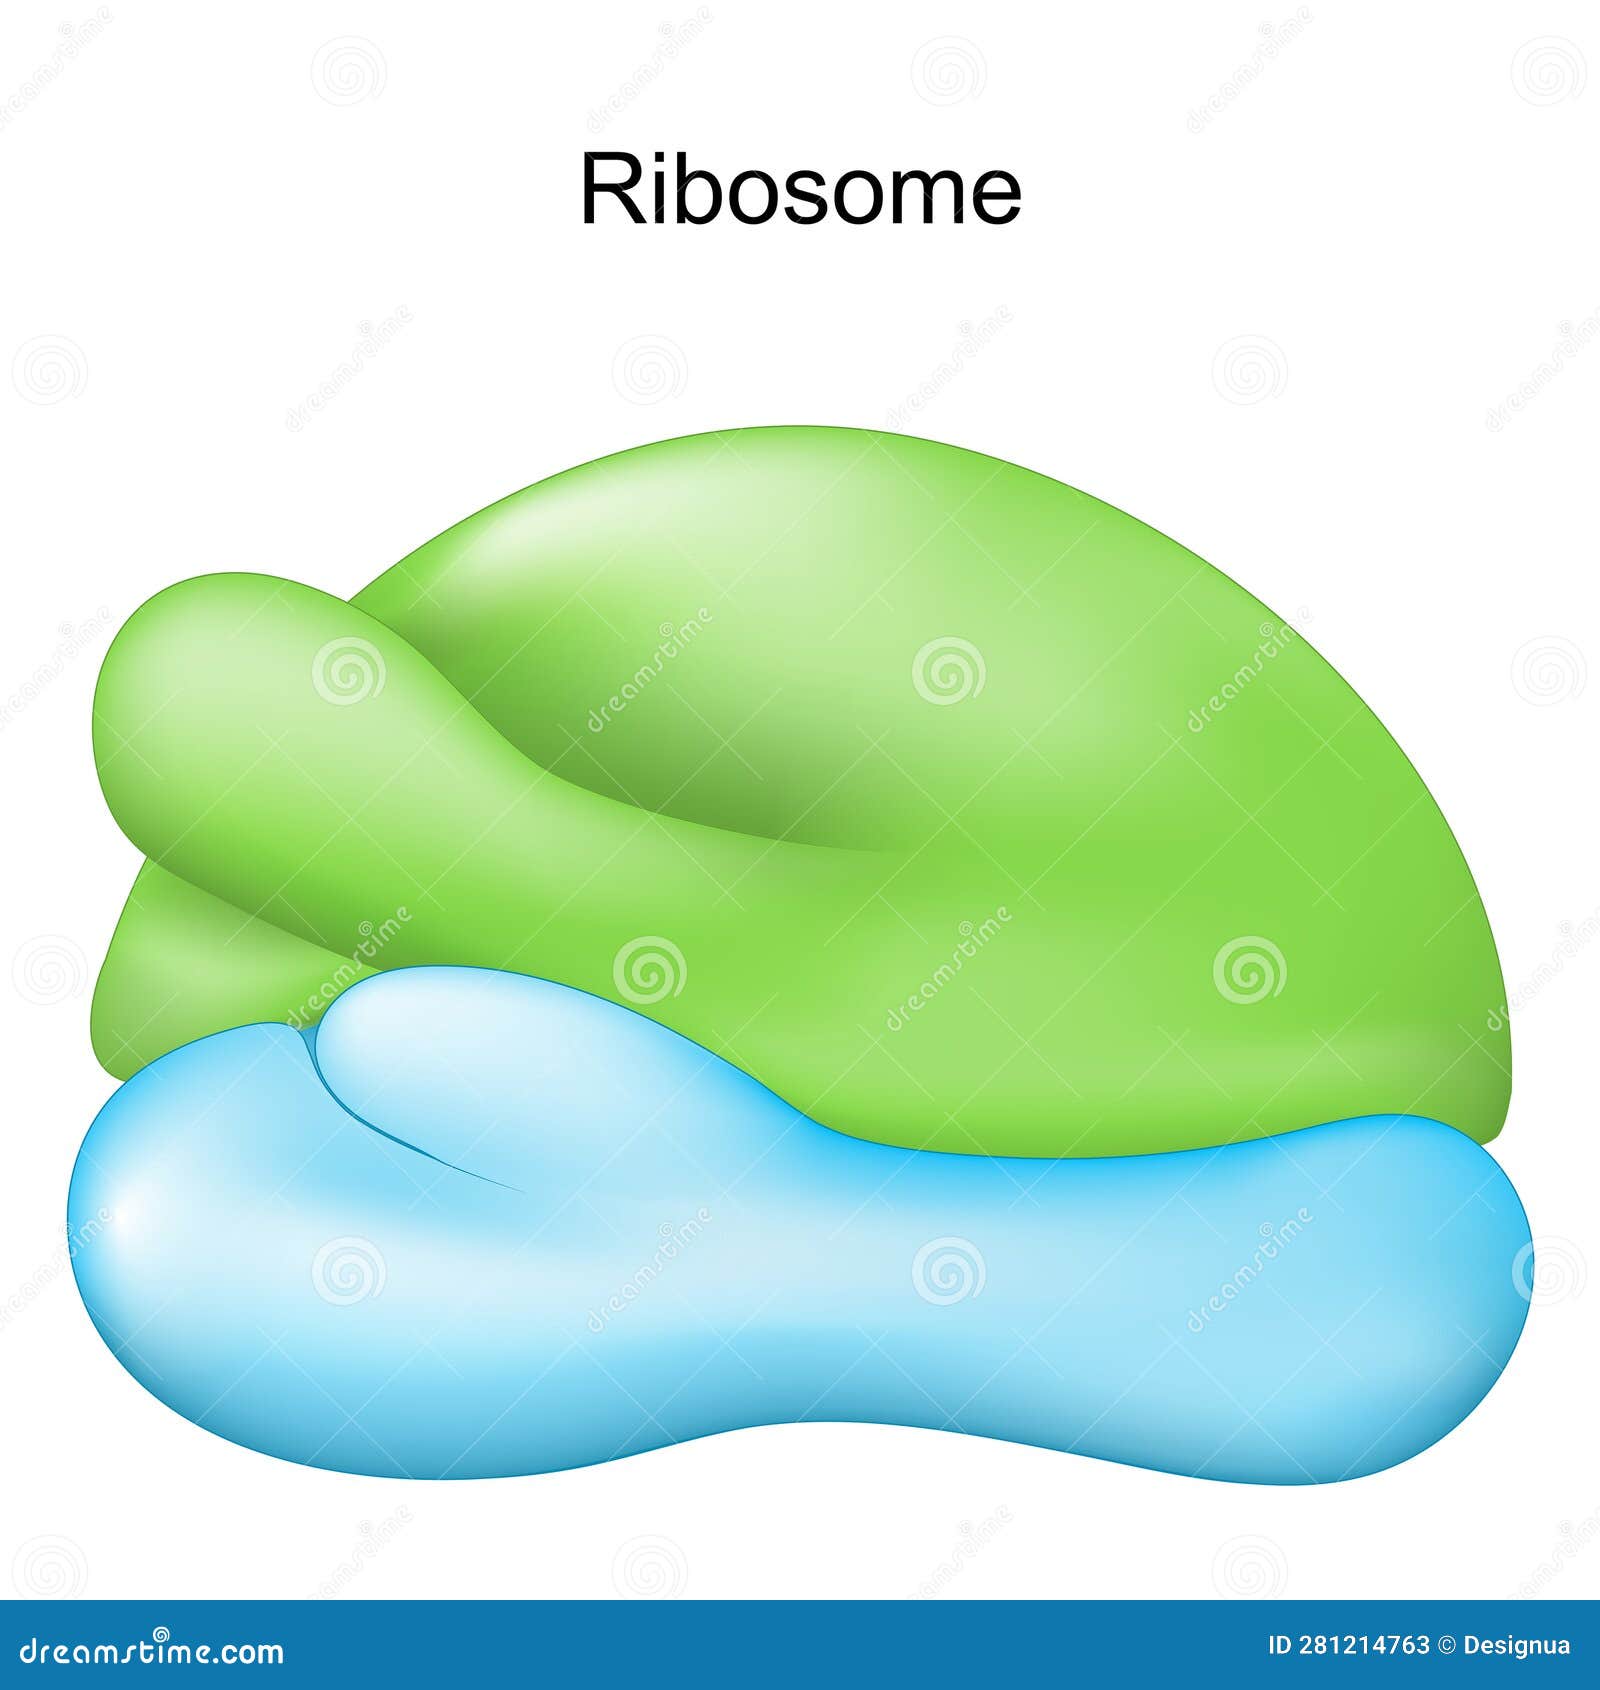 ribosome. cell organelle for protein synthesis